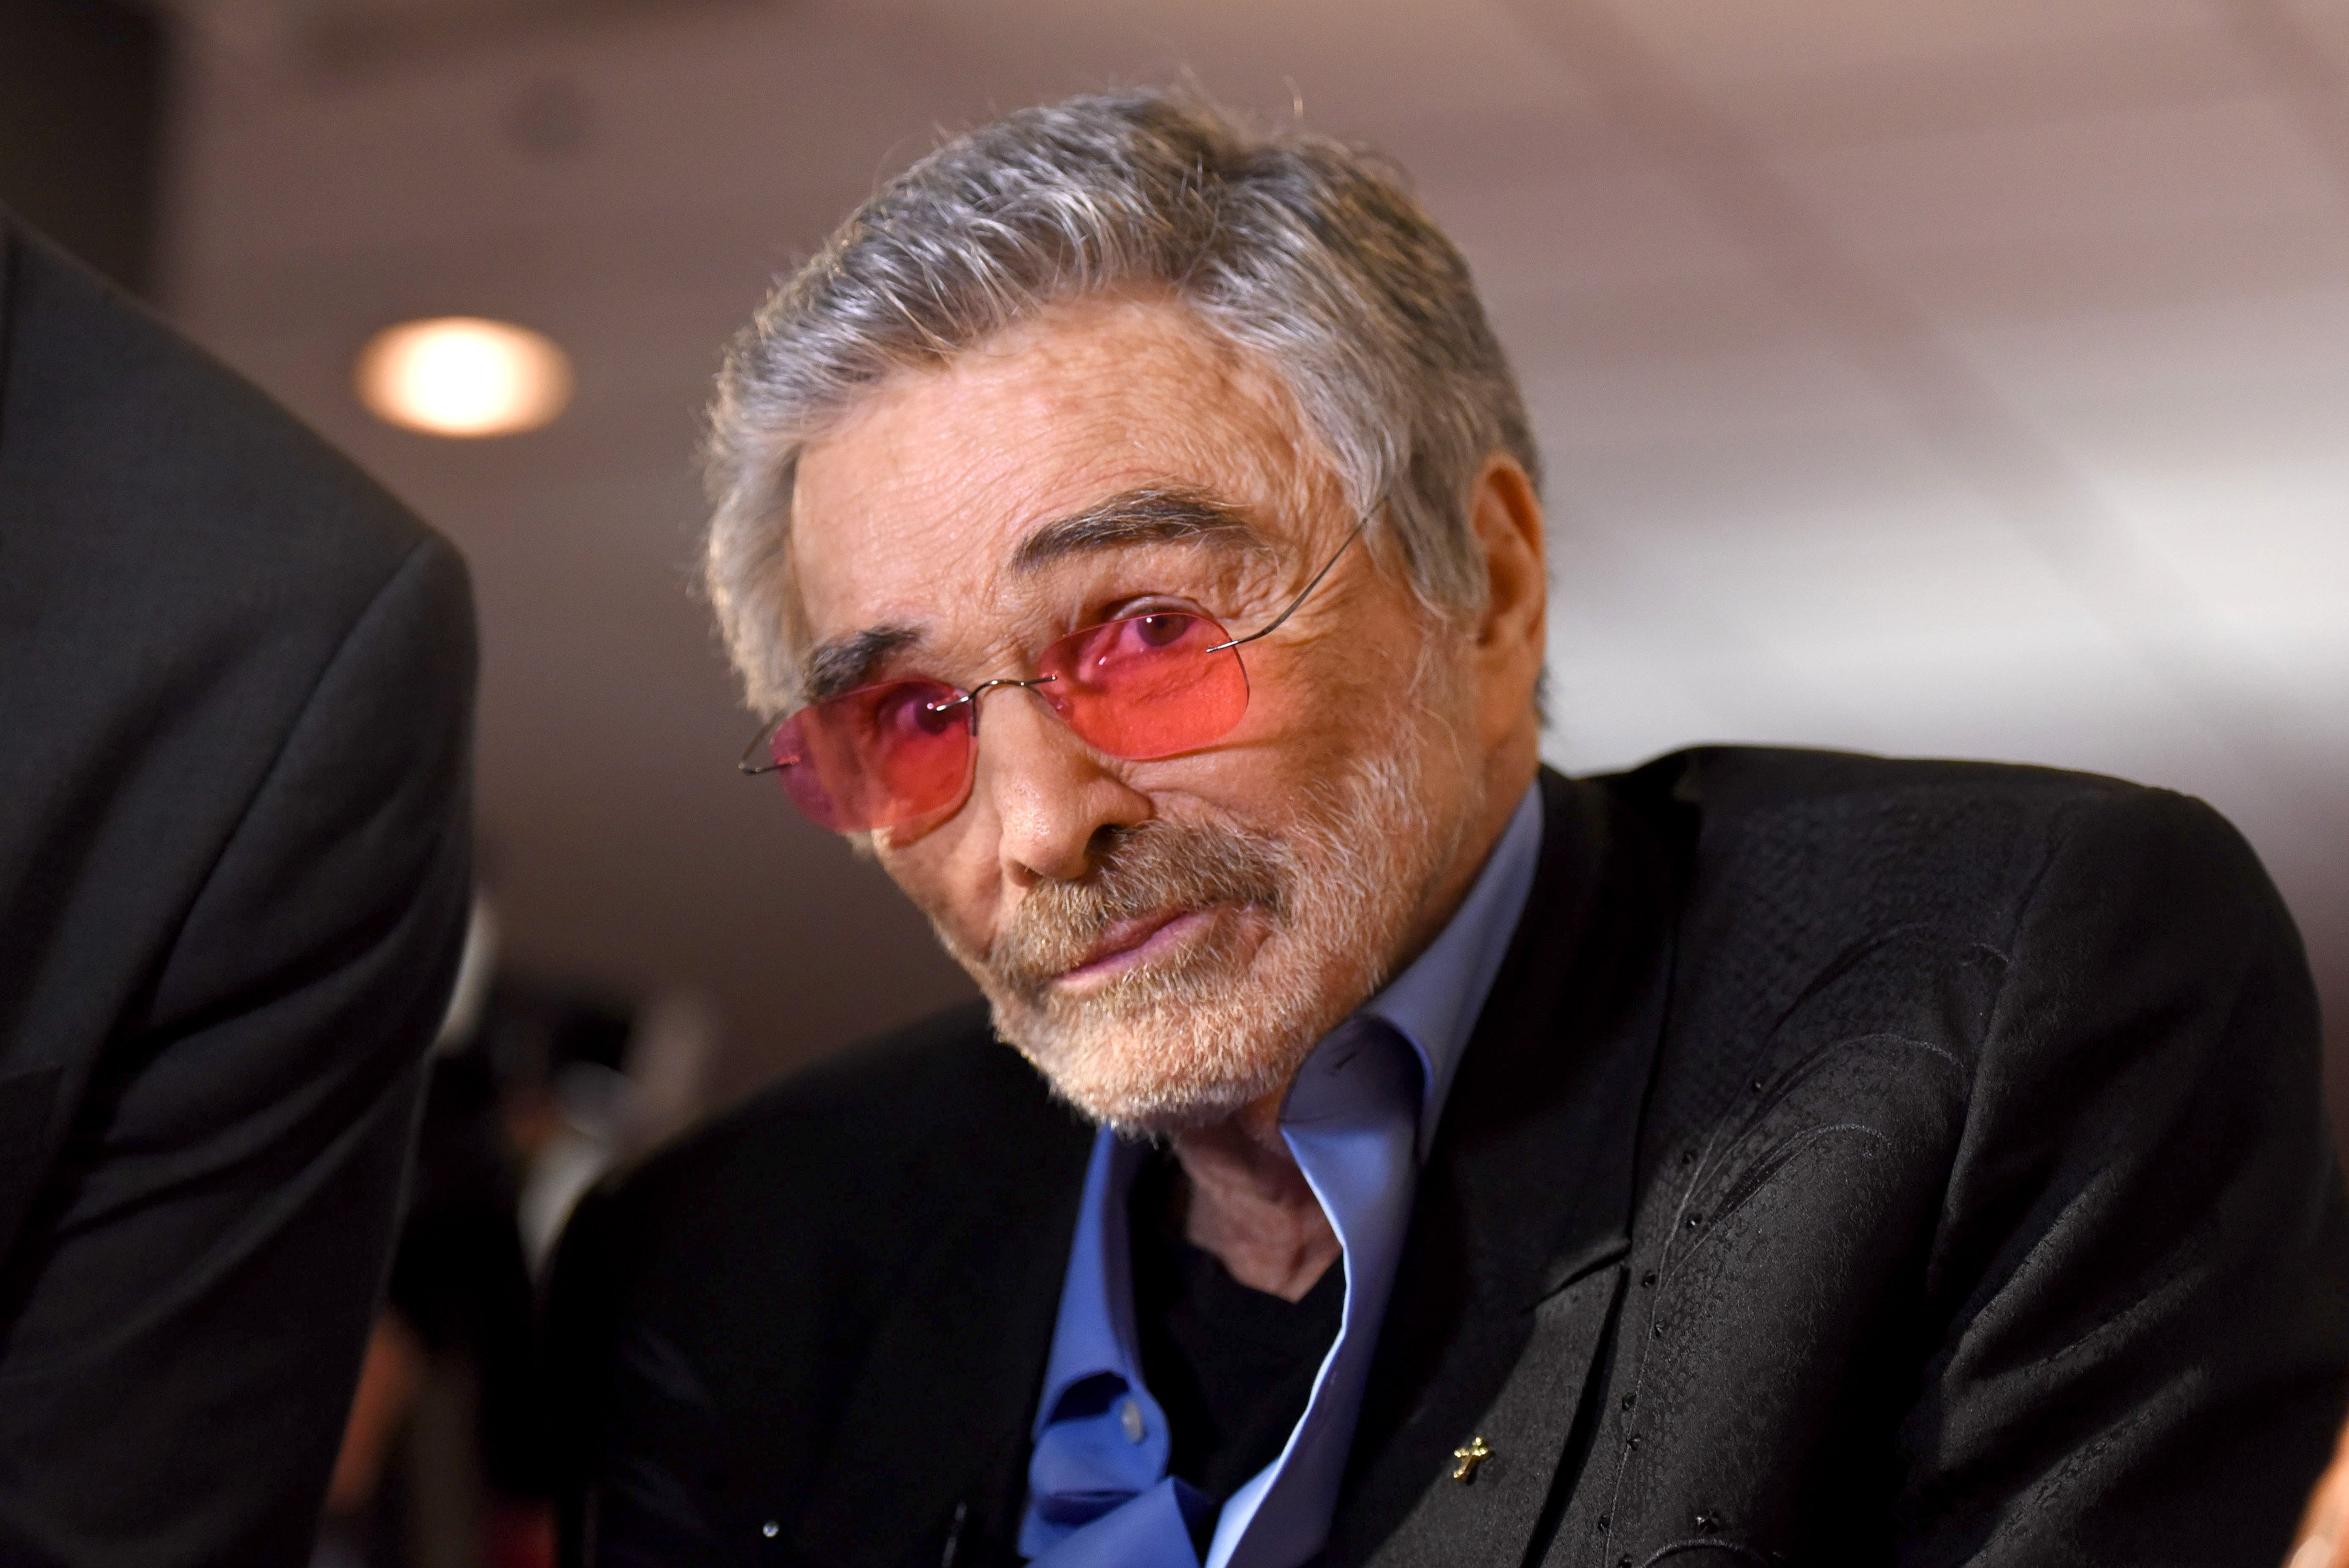 Burt Reynolds attending the "Dog Years" premiere during 2017 Tribeca Film Festival at Cinepolis Chelsea on April 22, 2017 in New York City. / Source: Getty Images